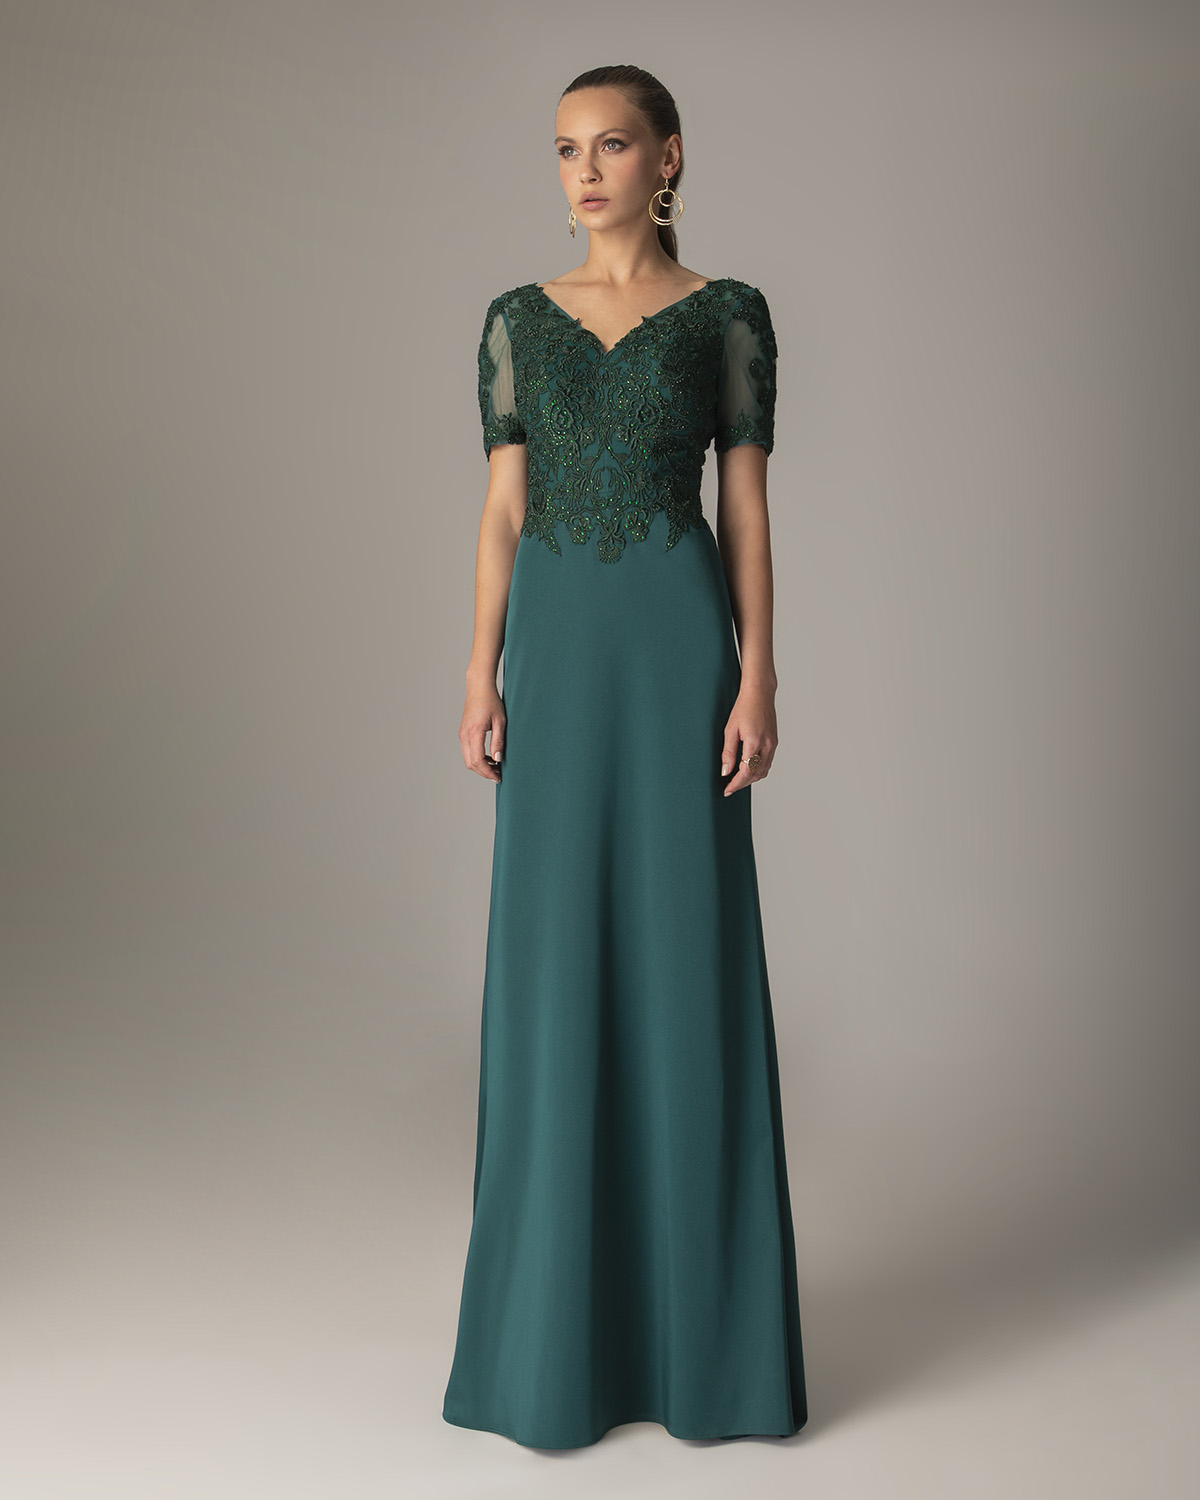 LAKISHA - Long satin dress with short sleeves and applique beaded lace on the top